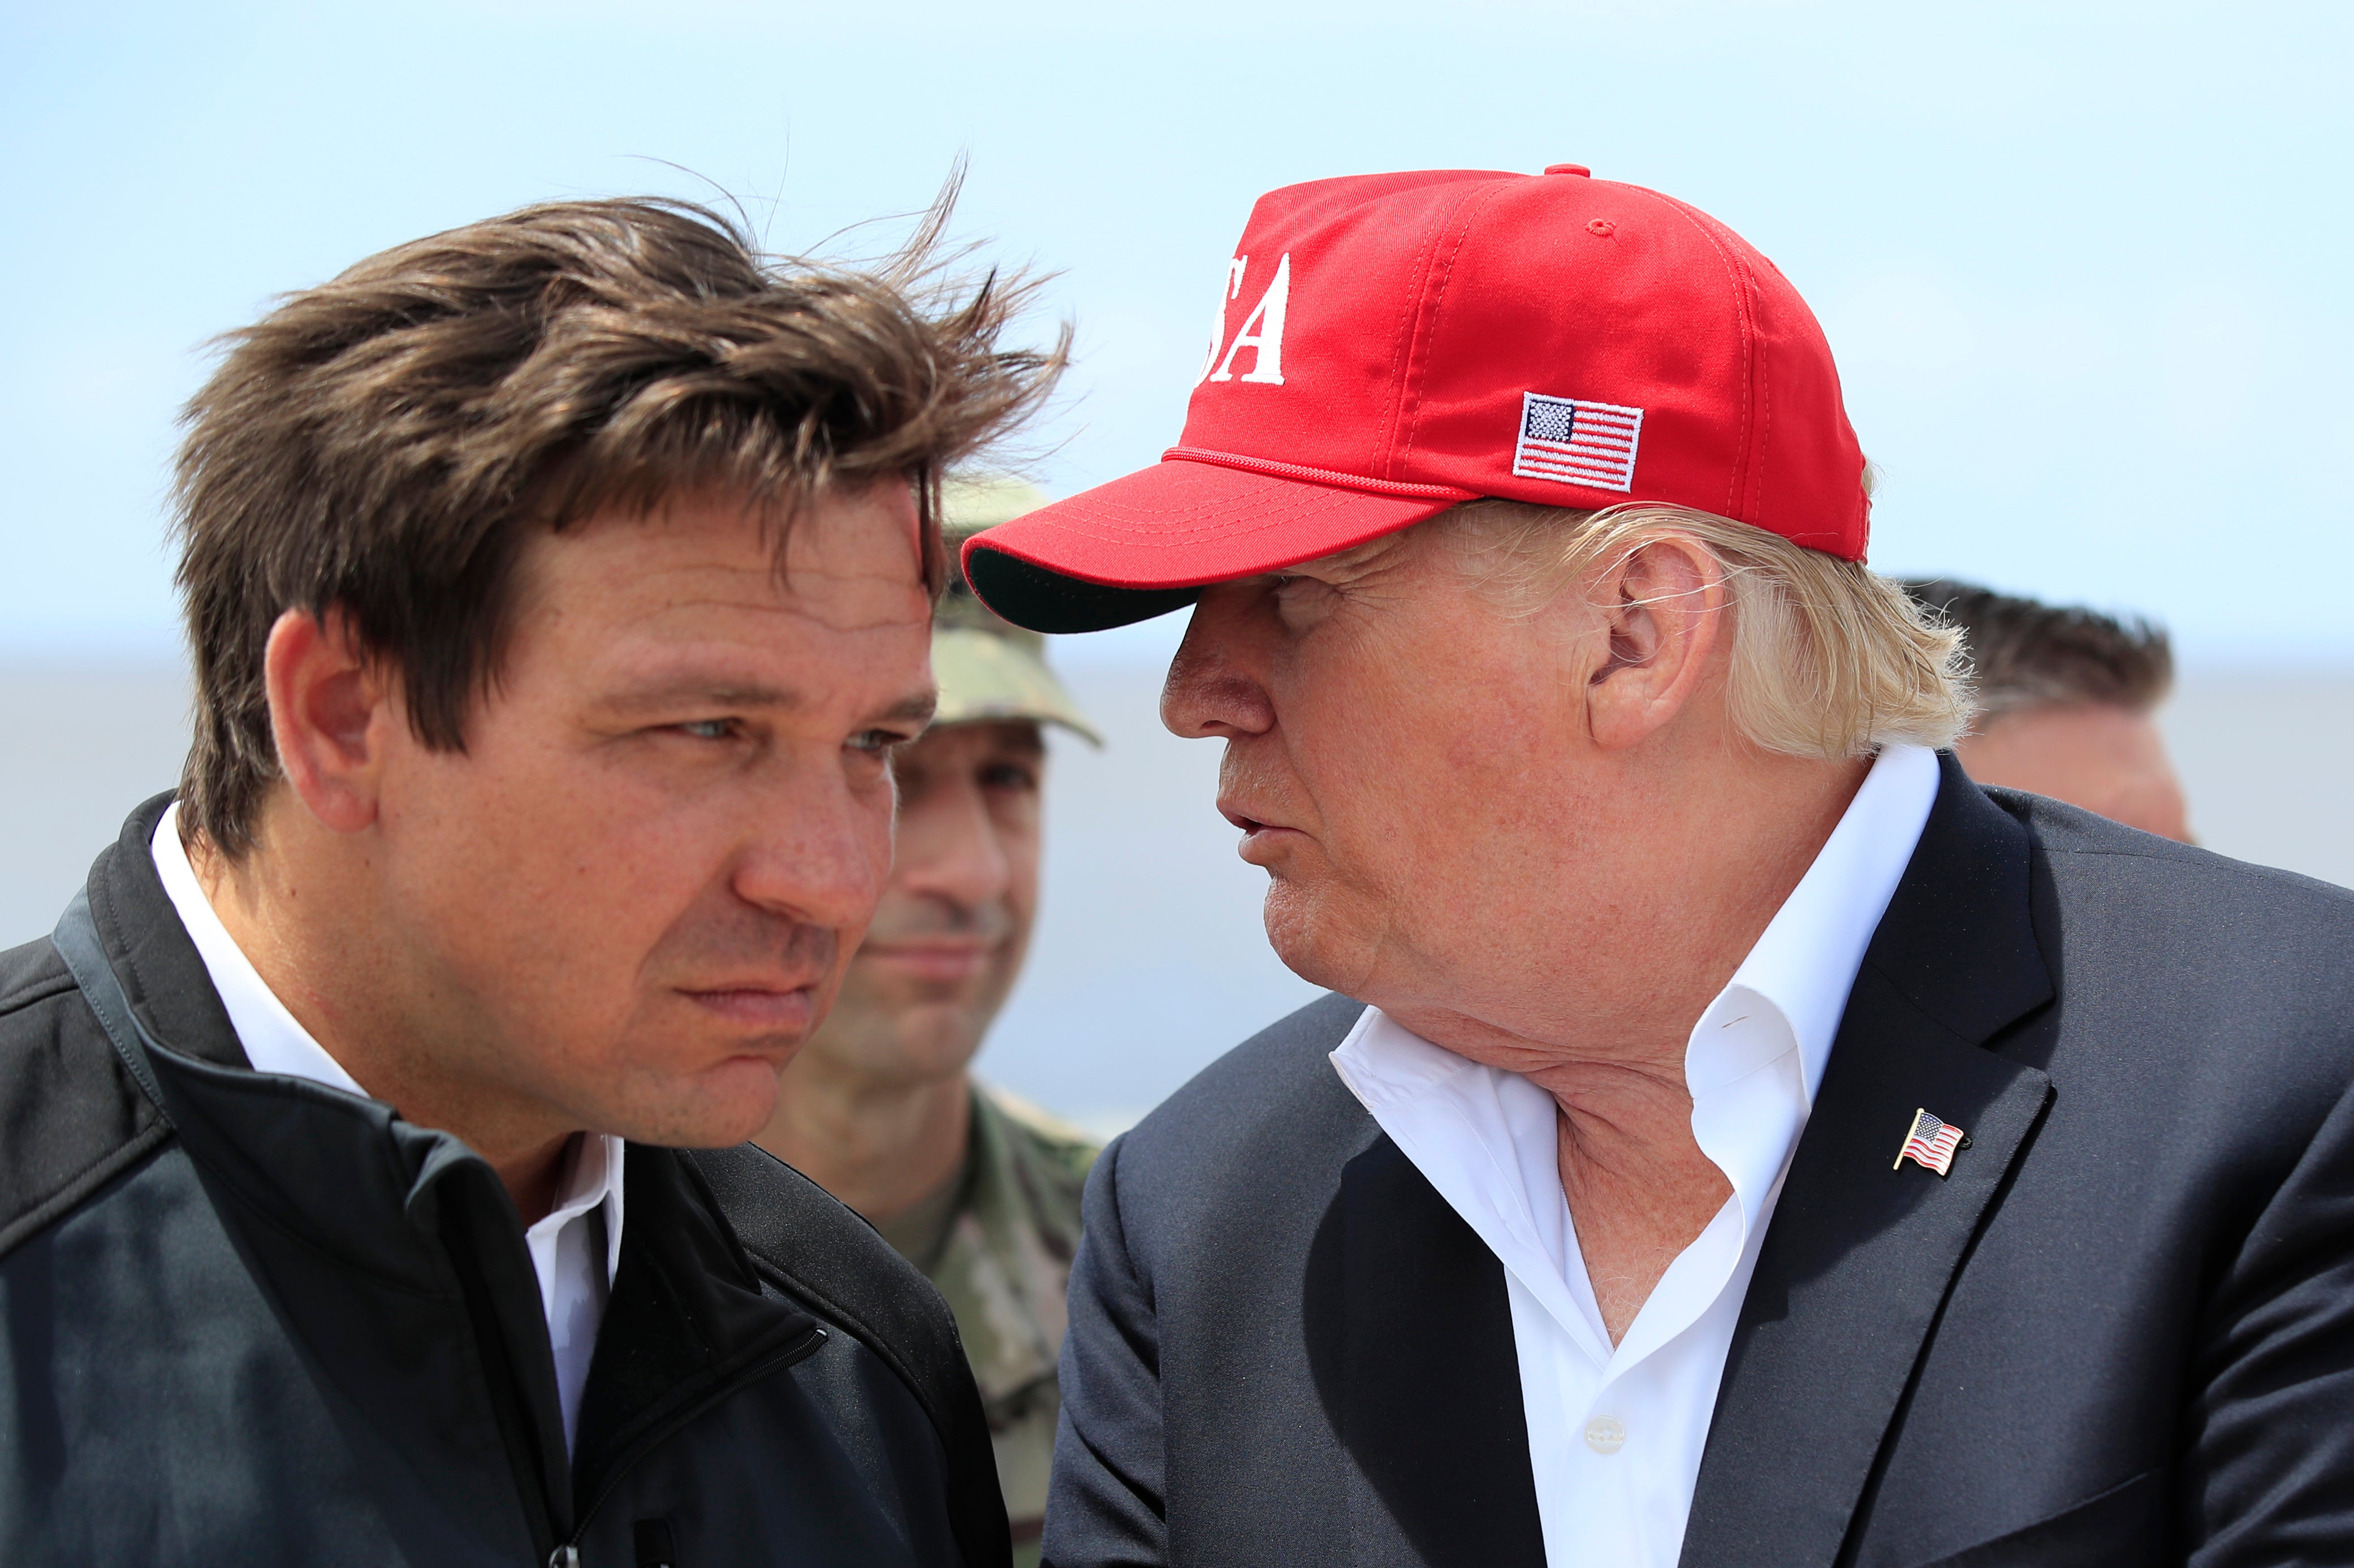 DeSantis and Trump are expected to face off for the 2024 Republican nomination